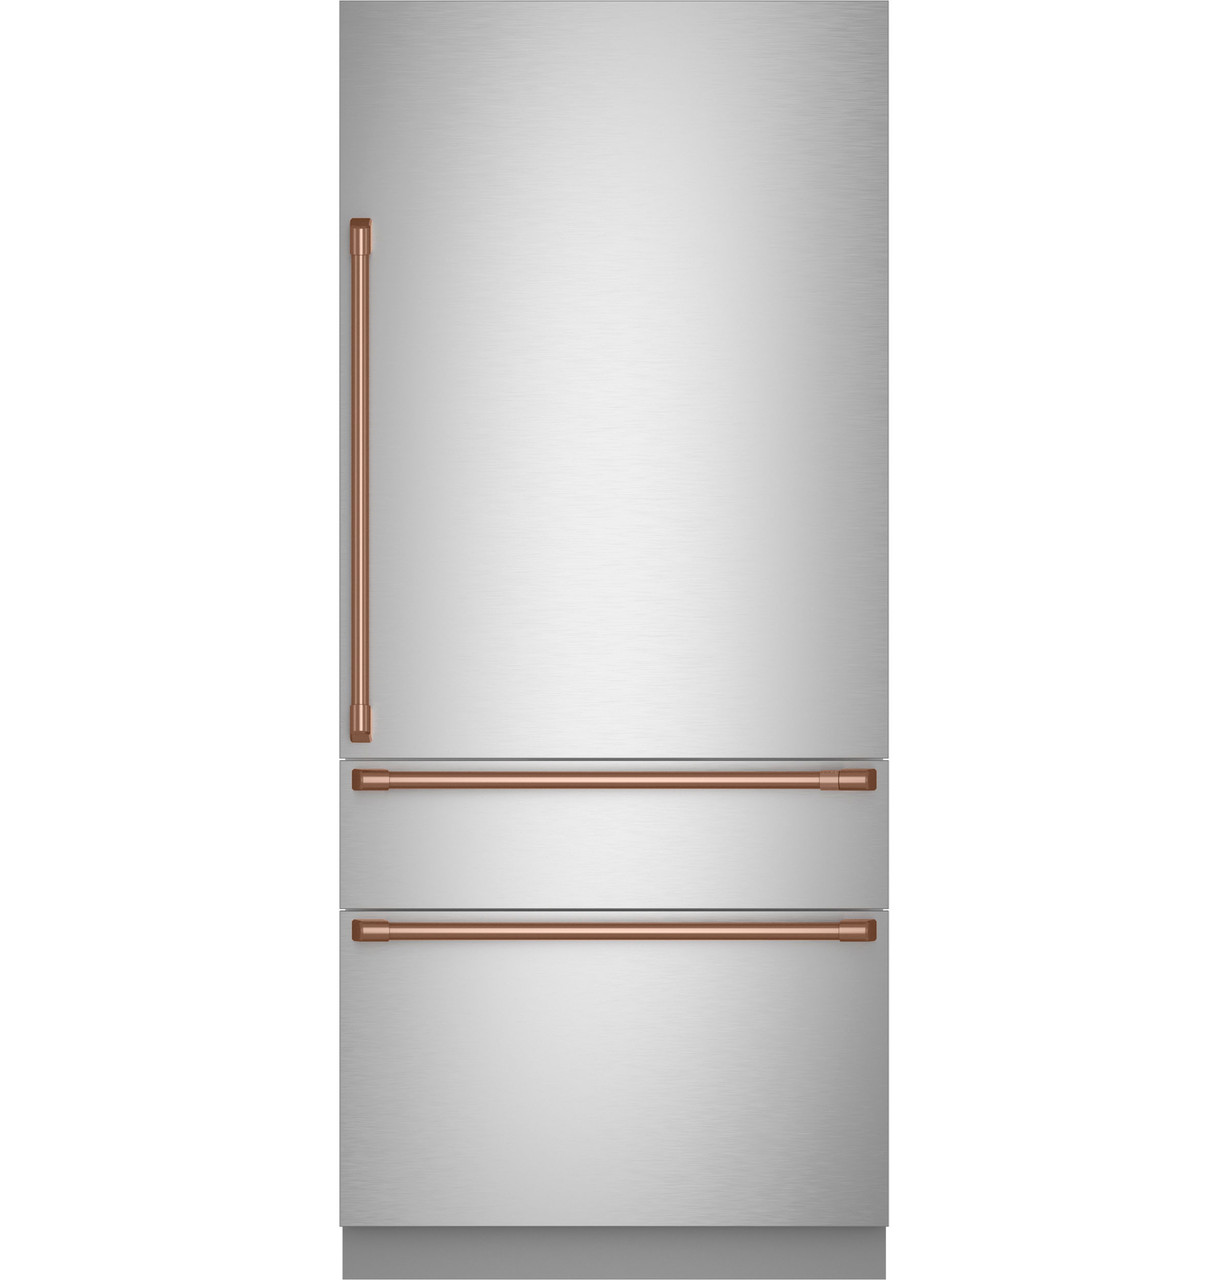 GE Cafe CDB36RP2PS1 - 36 Refrigerator Bottom Freezer Build-In Stainless